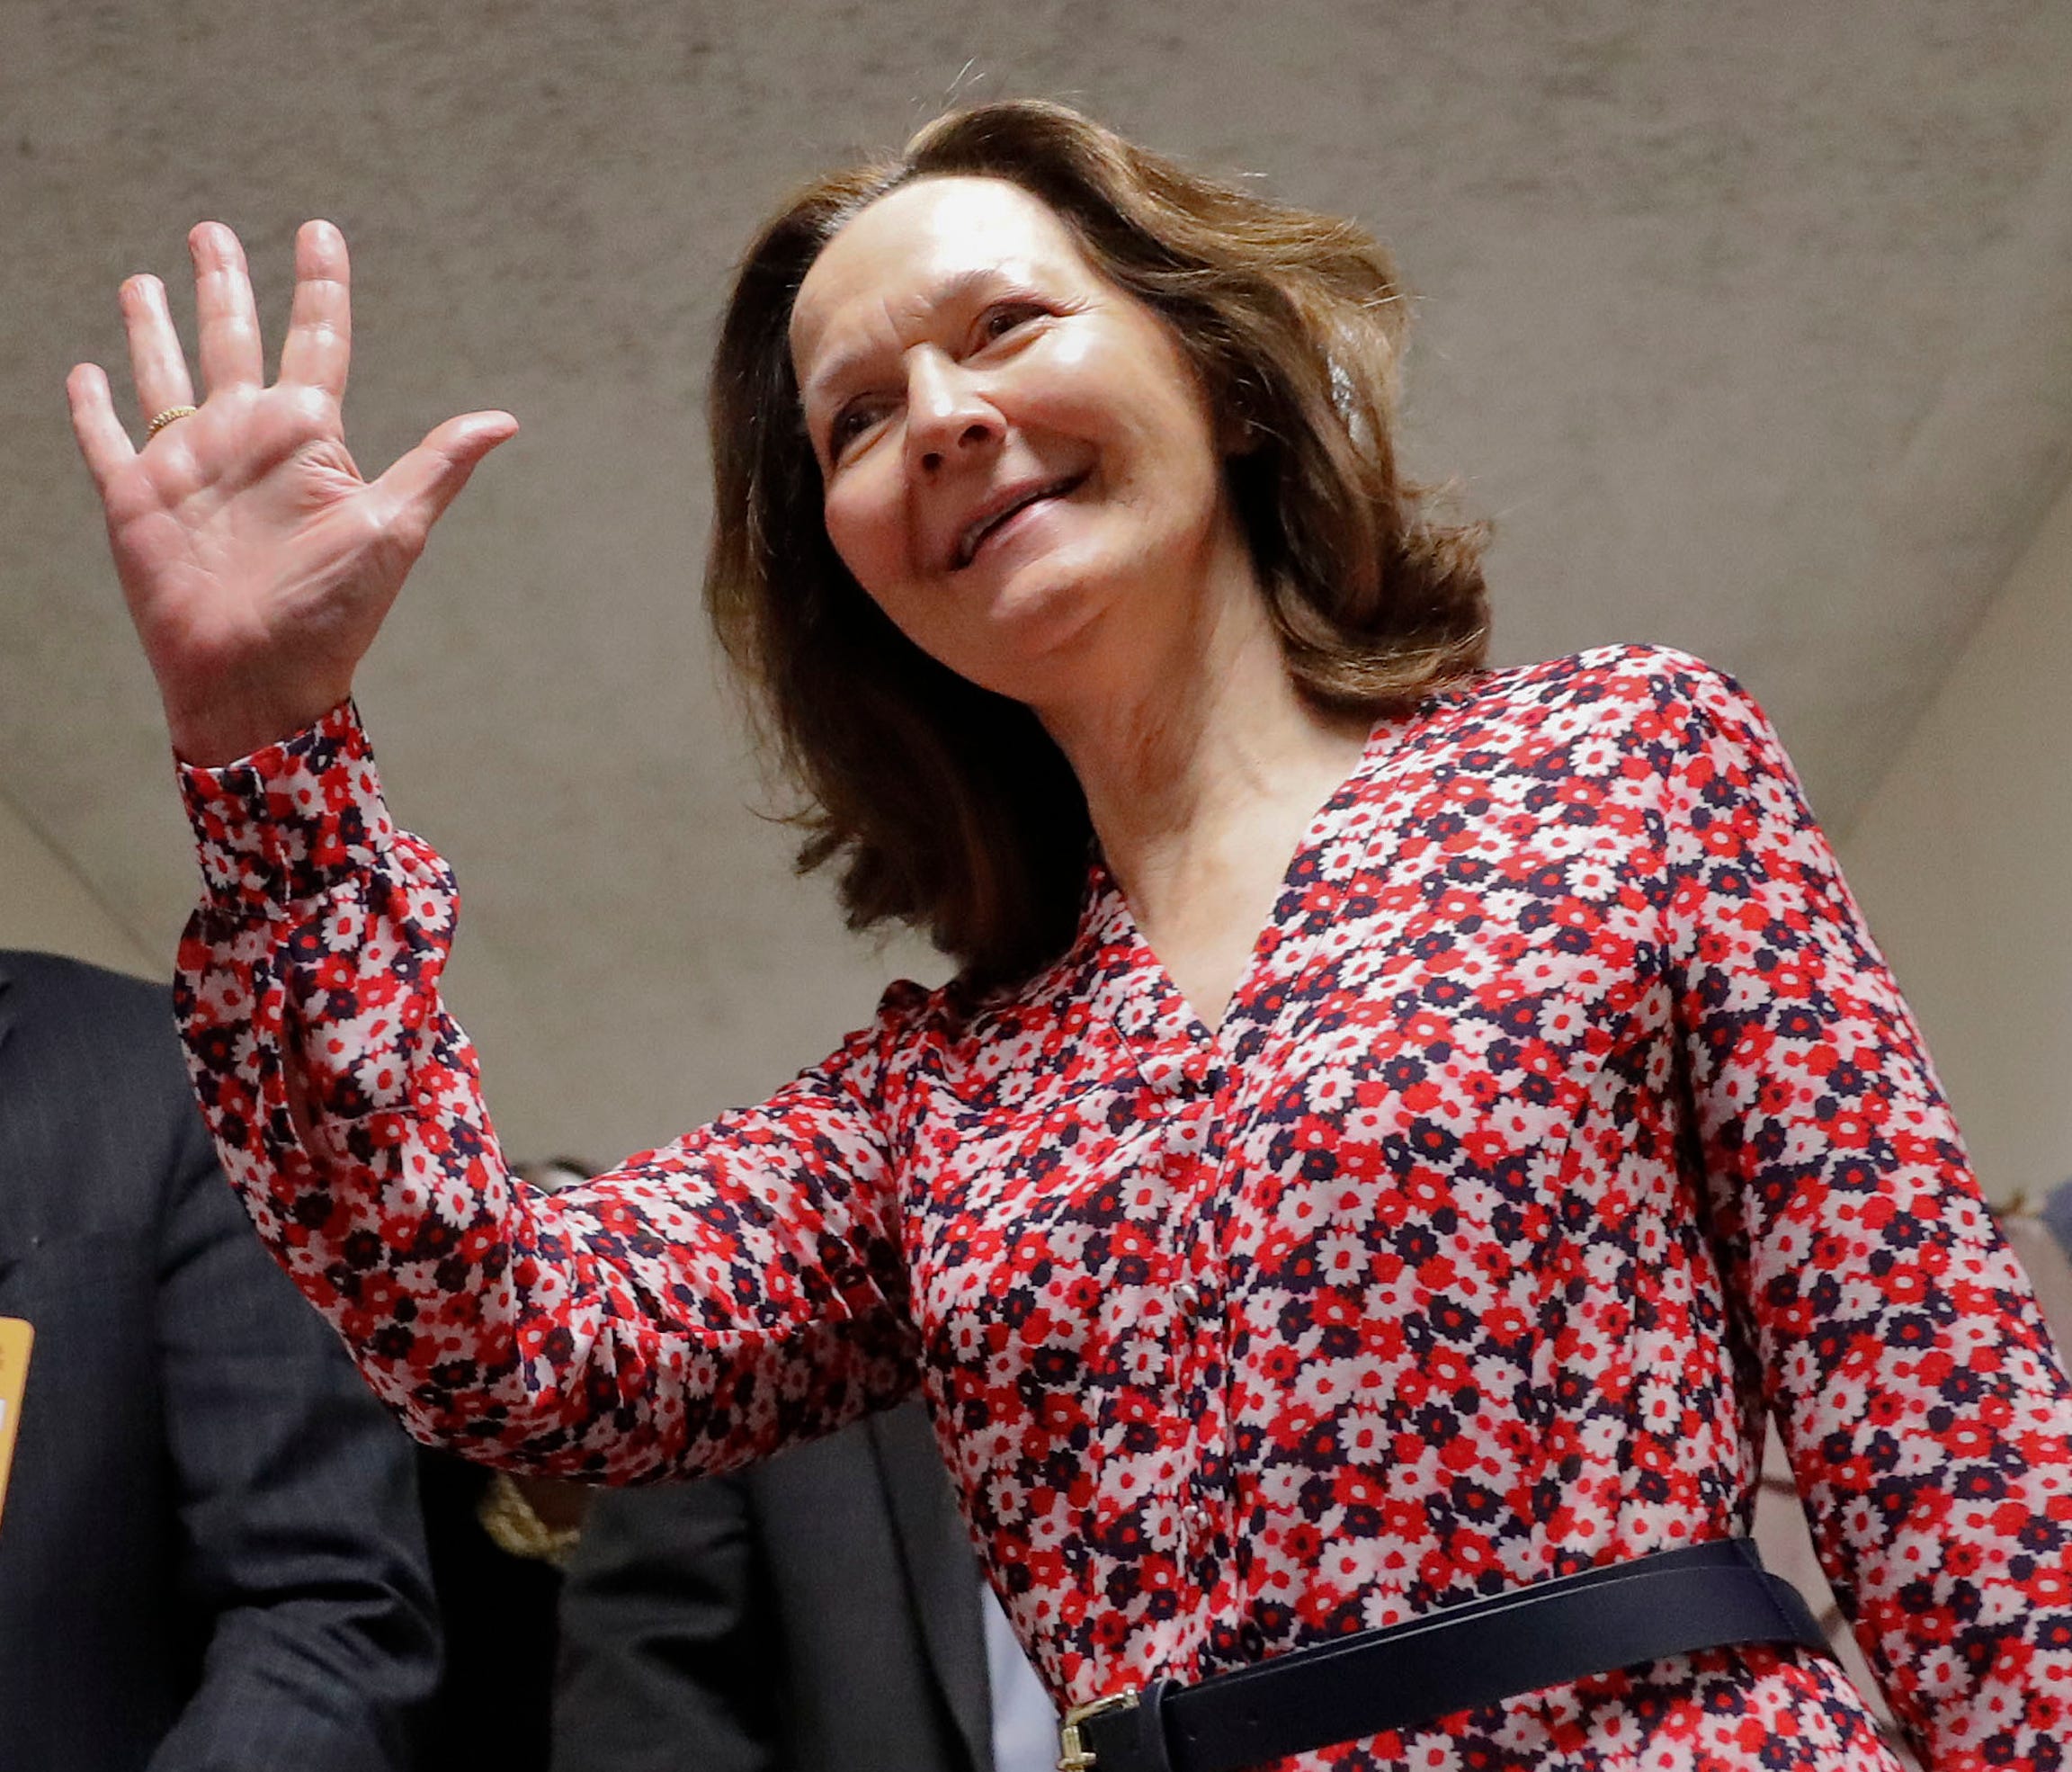 Gina Haspel waves as she arrives for her meeting with Sen. Joe Manchin, D-W.Va., on Capitol Hill.